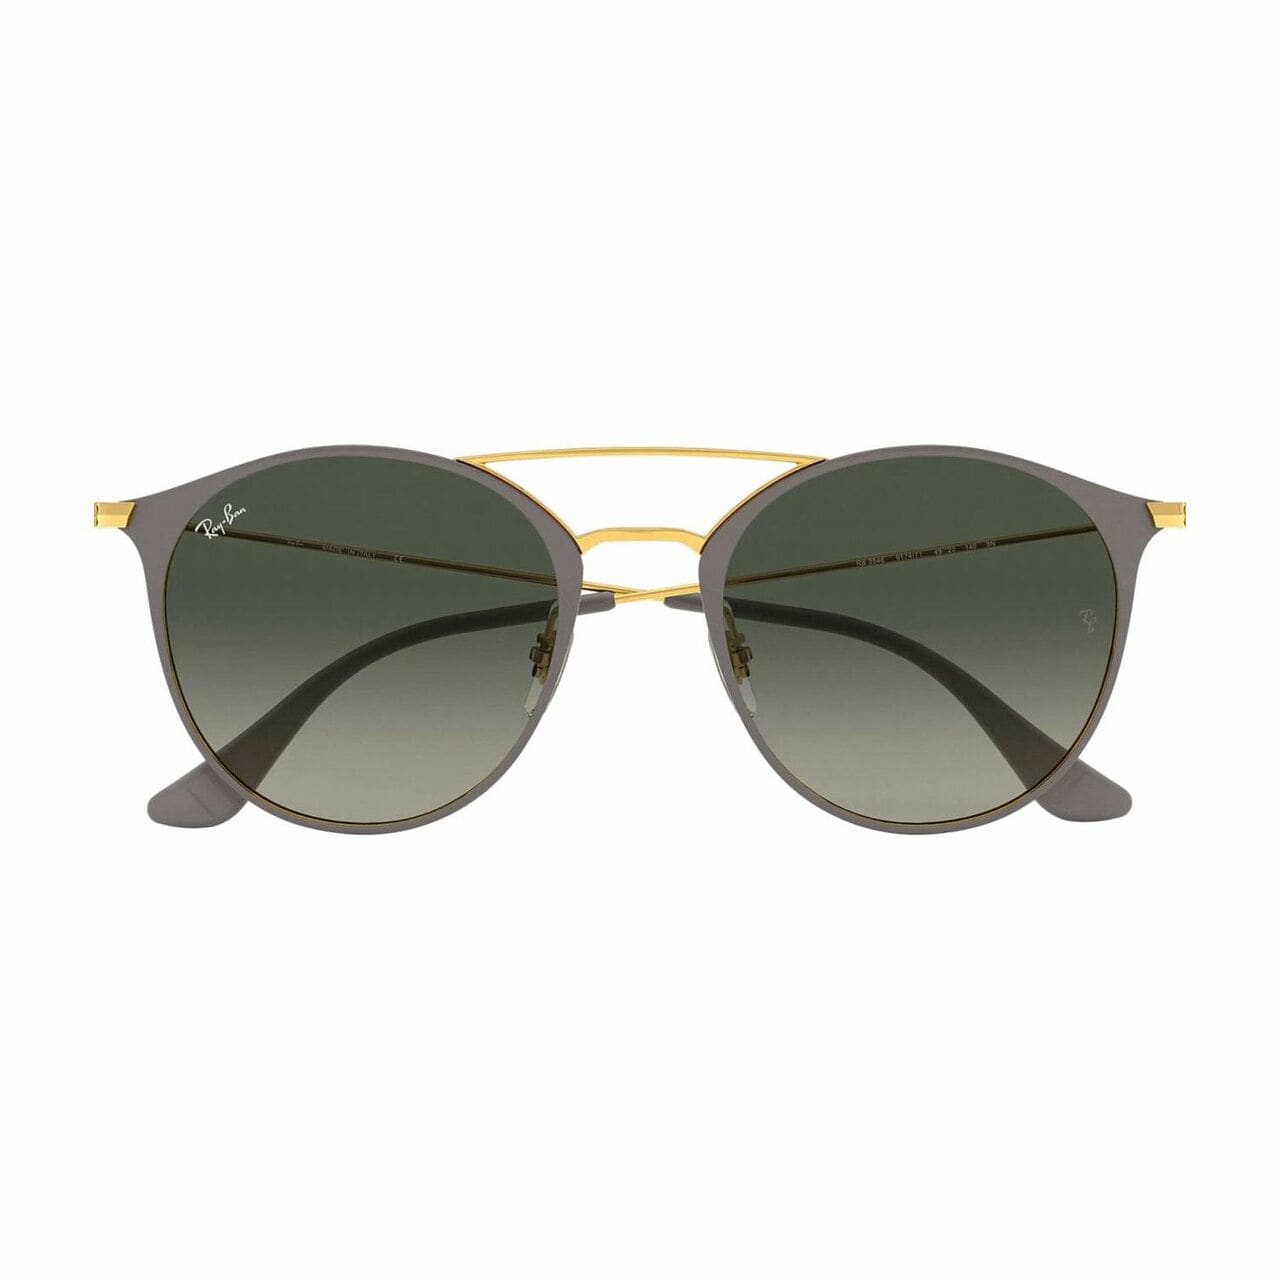 Ray-Ban RB3546-9174/71 Grey Gold Round Grey Gradient Lens Sunglasses 8056597081665